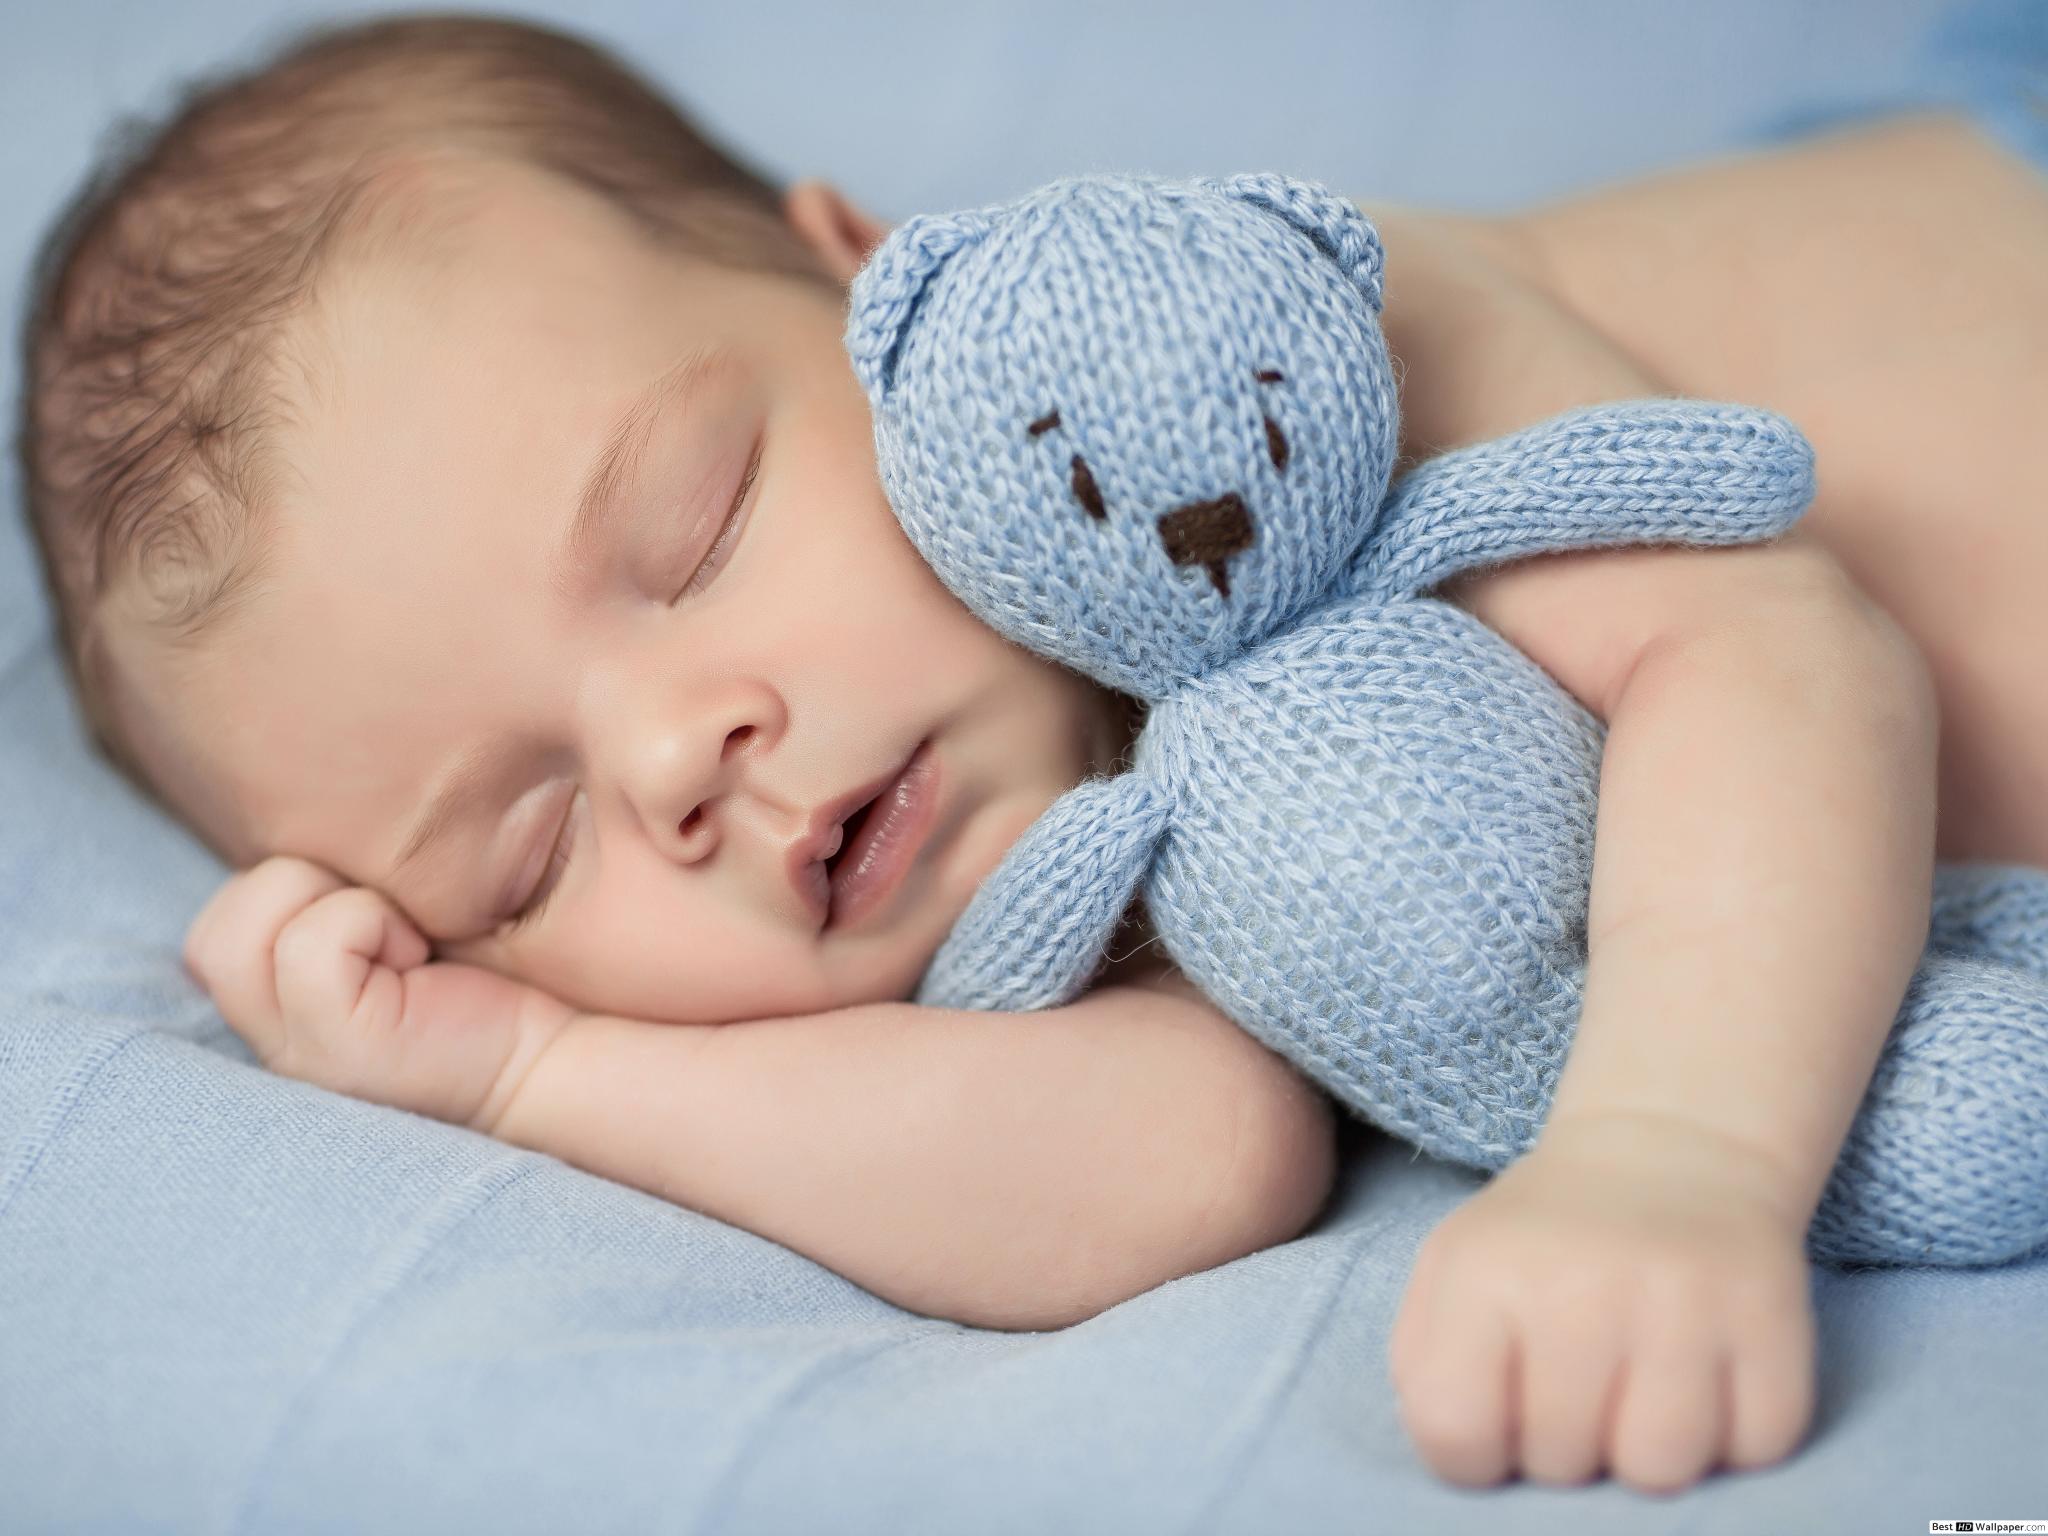 Sleeping baby with toy HD wallpaper download